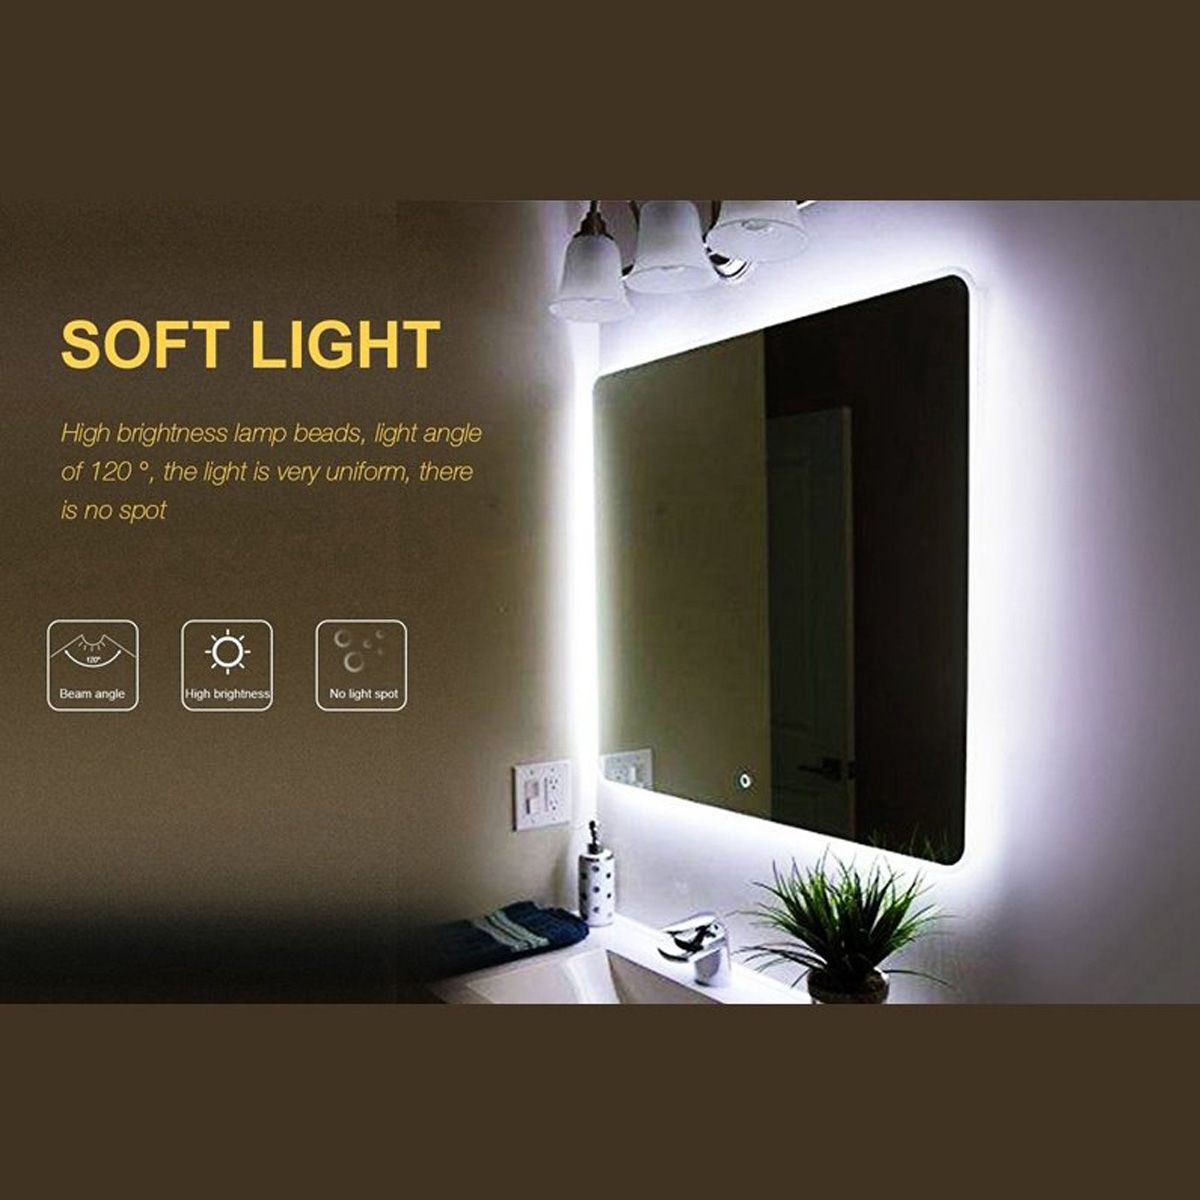 0512345M-USB-LED-Light-Strip-Stepless-Dimming-Home-Vanity-mirror-Dressing-Makeup-Table-Lamp-1728651